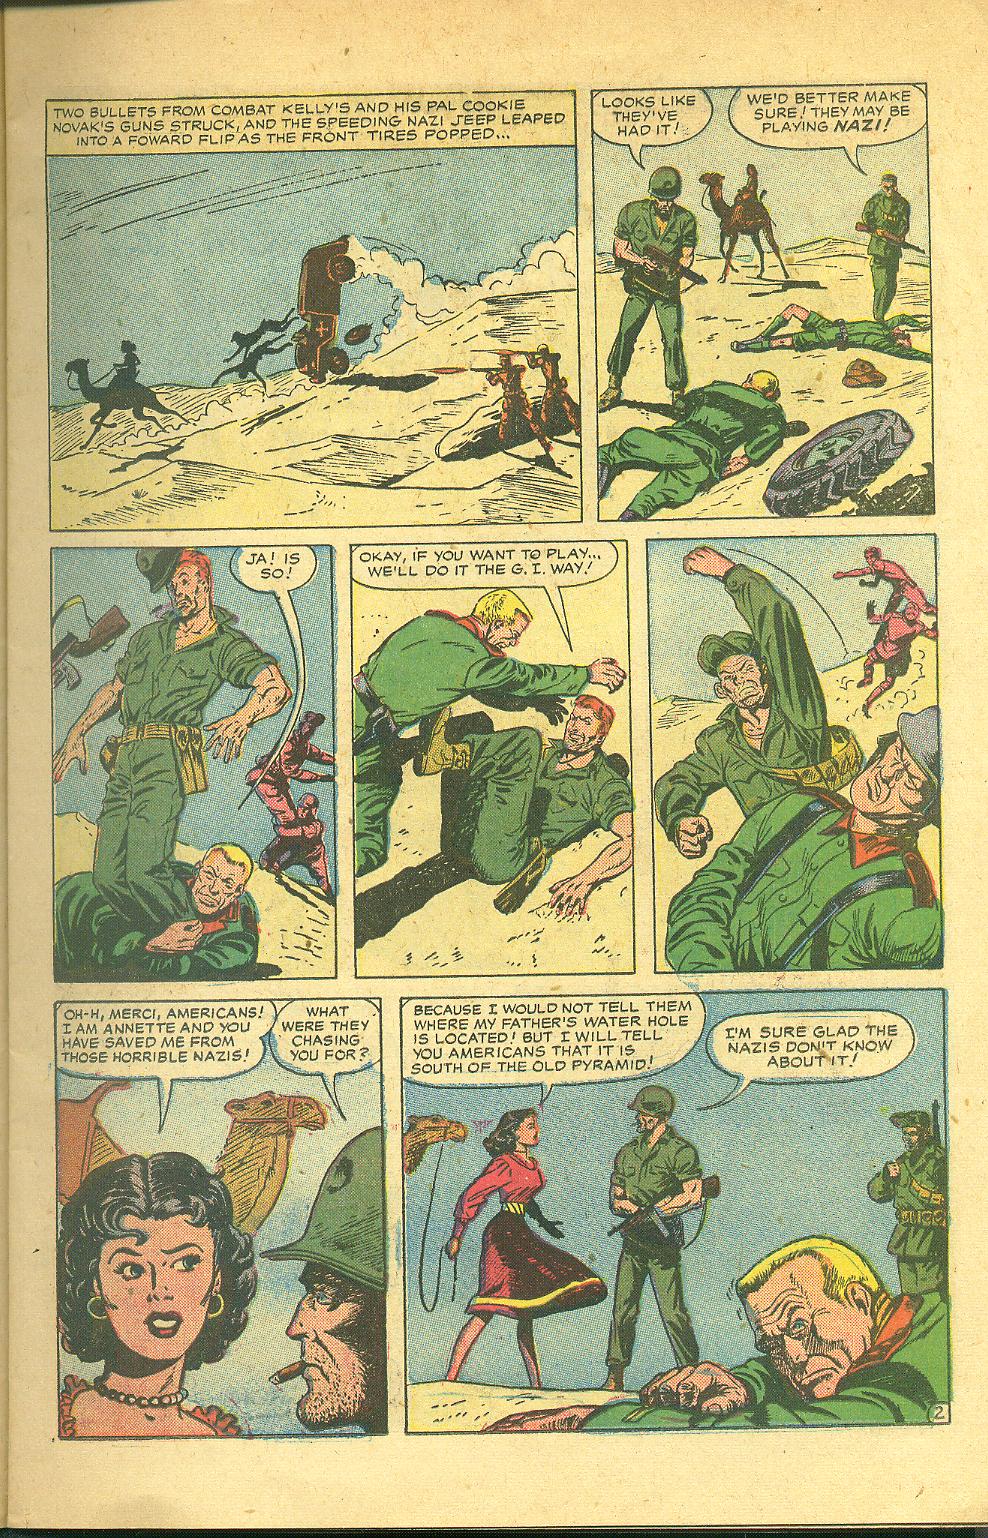 Read online Combat Kelly (1951) comic -  Issue #37 - 12